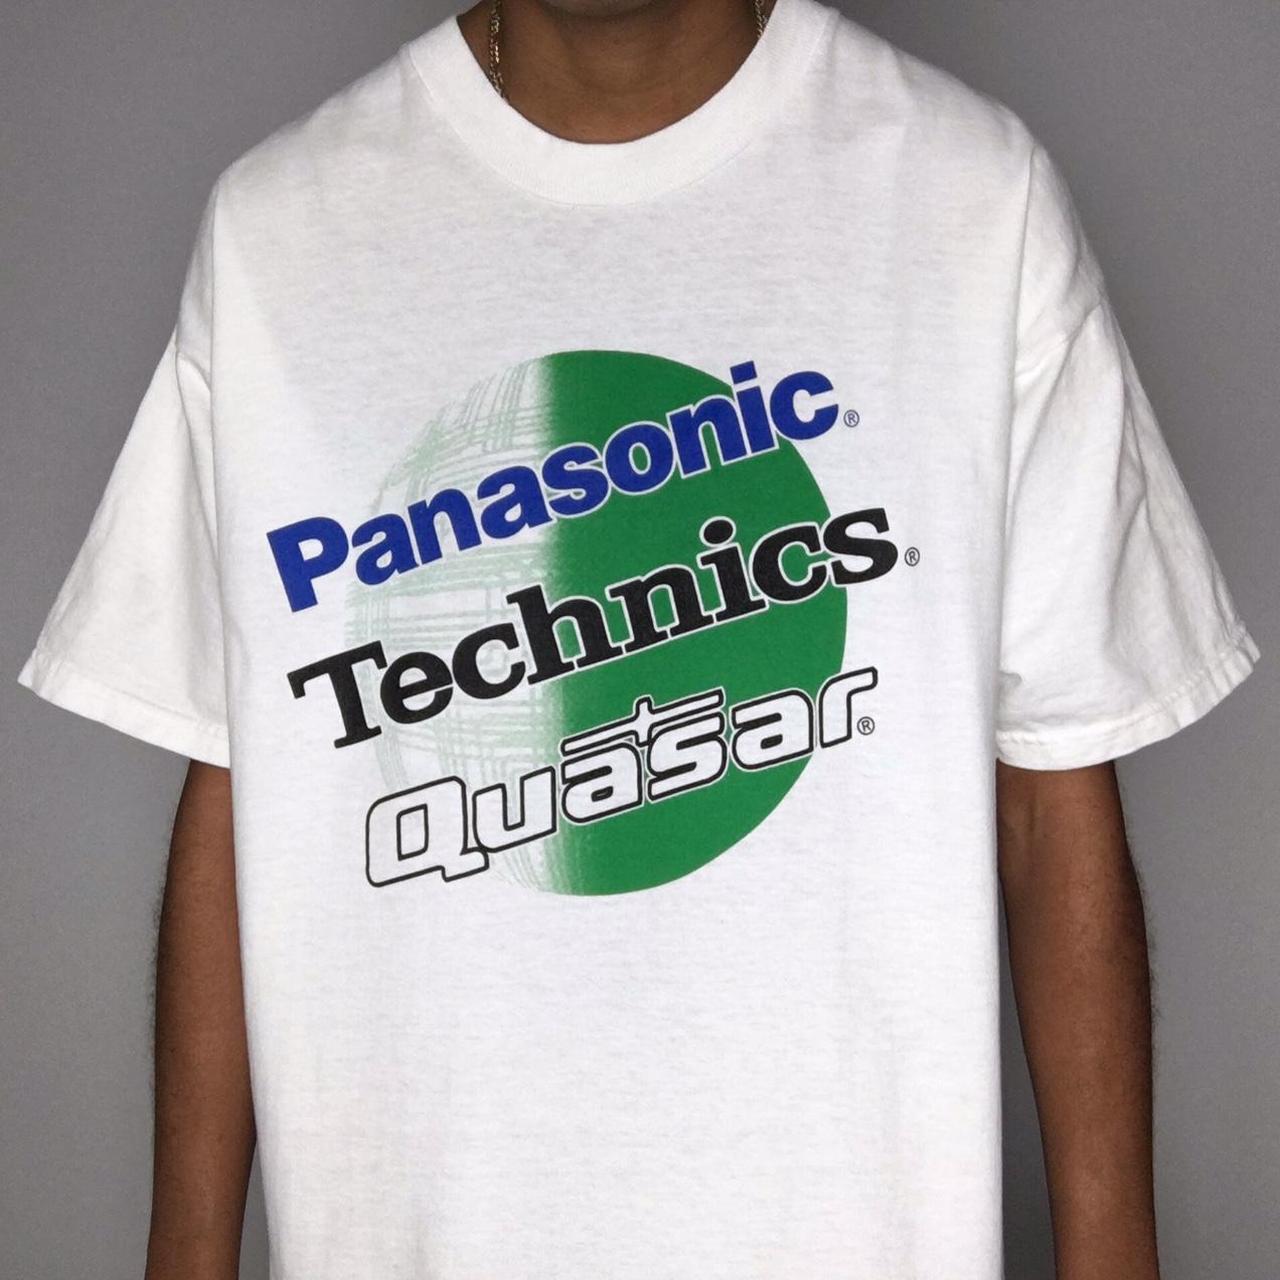 Product Image 1 - Vintage Panasonic Graphic T-Shirt in